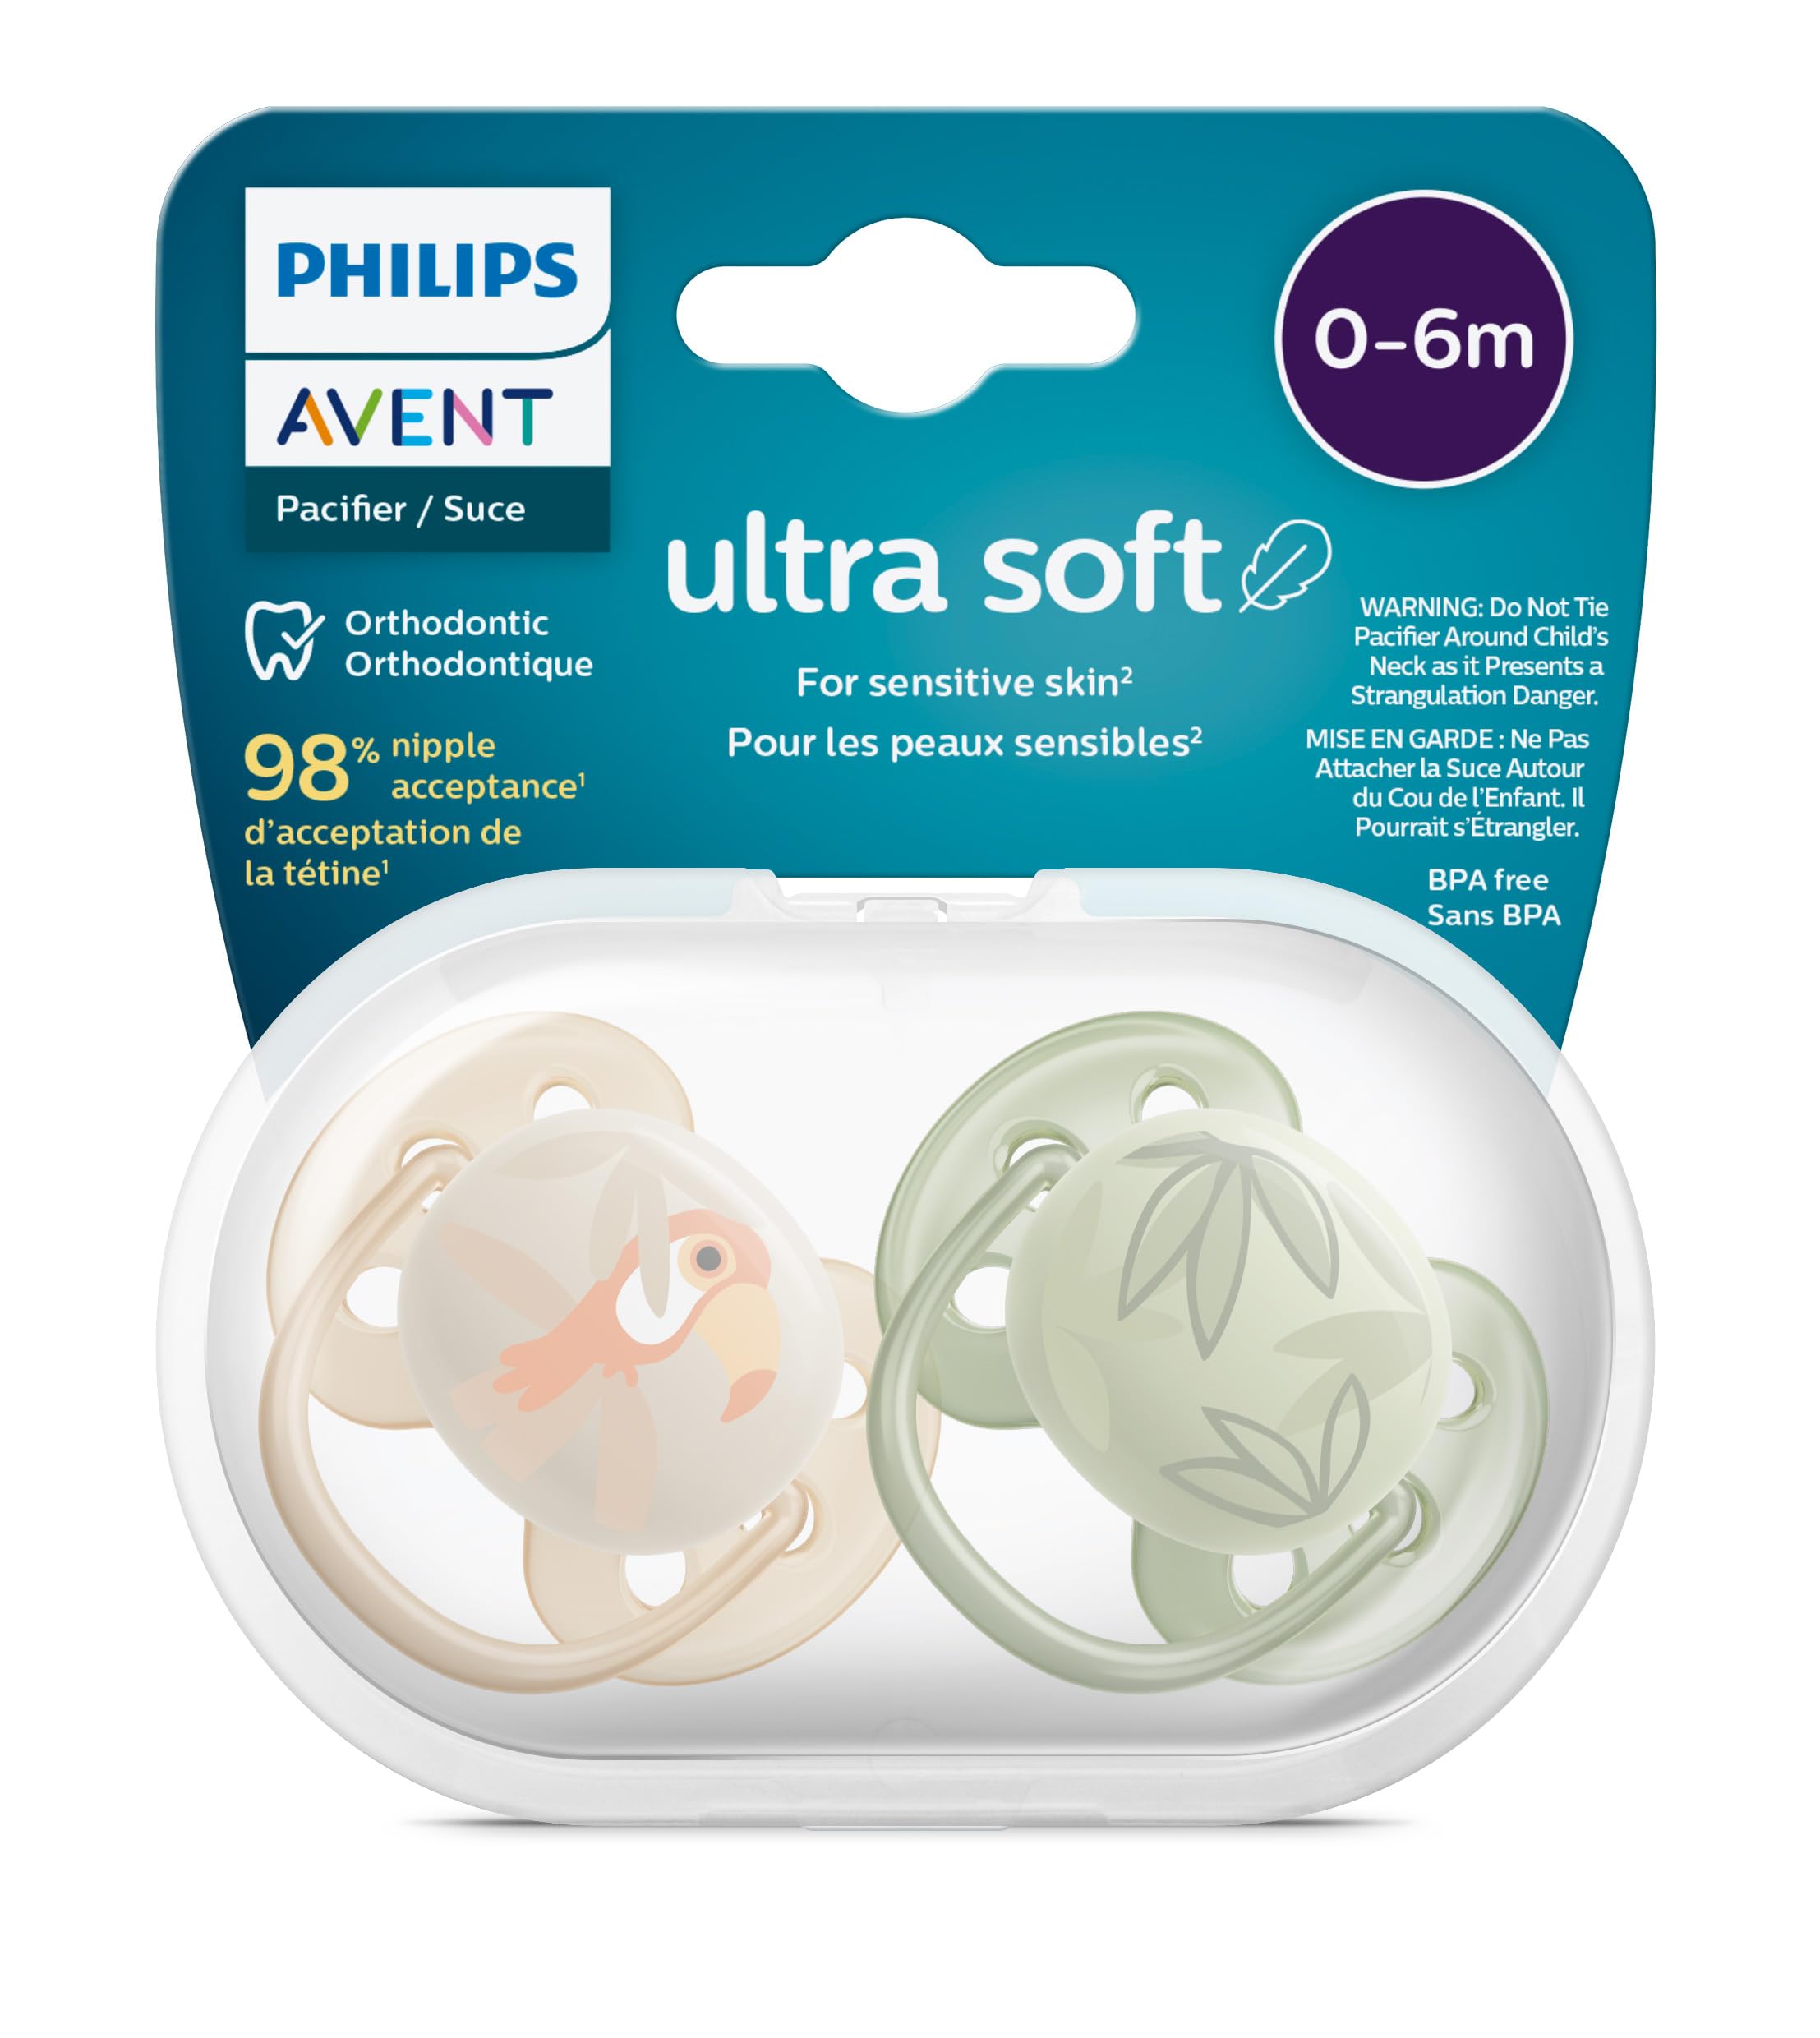 Philips Avent Ultra Soft Pacifier - 4 x Soft and Flexible Baby Pacifiers for Babies Aged 0-6 Months, BPA Free with Sterilizer Carry Case, SCF091/24